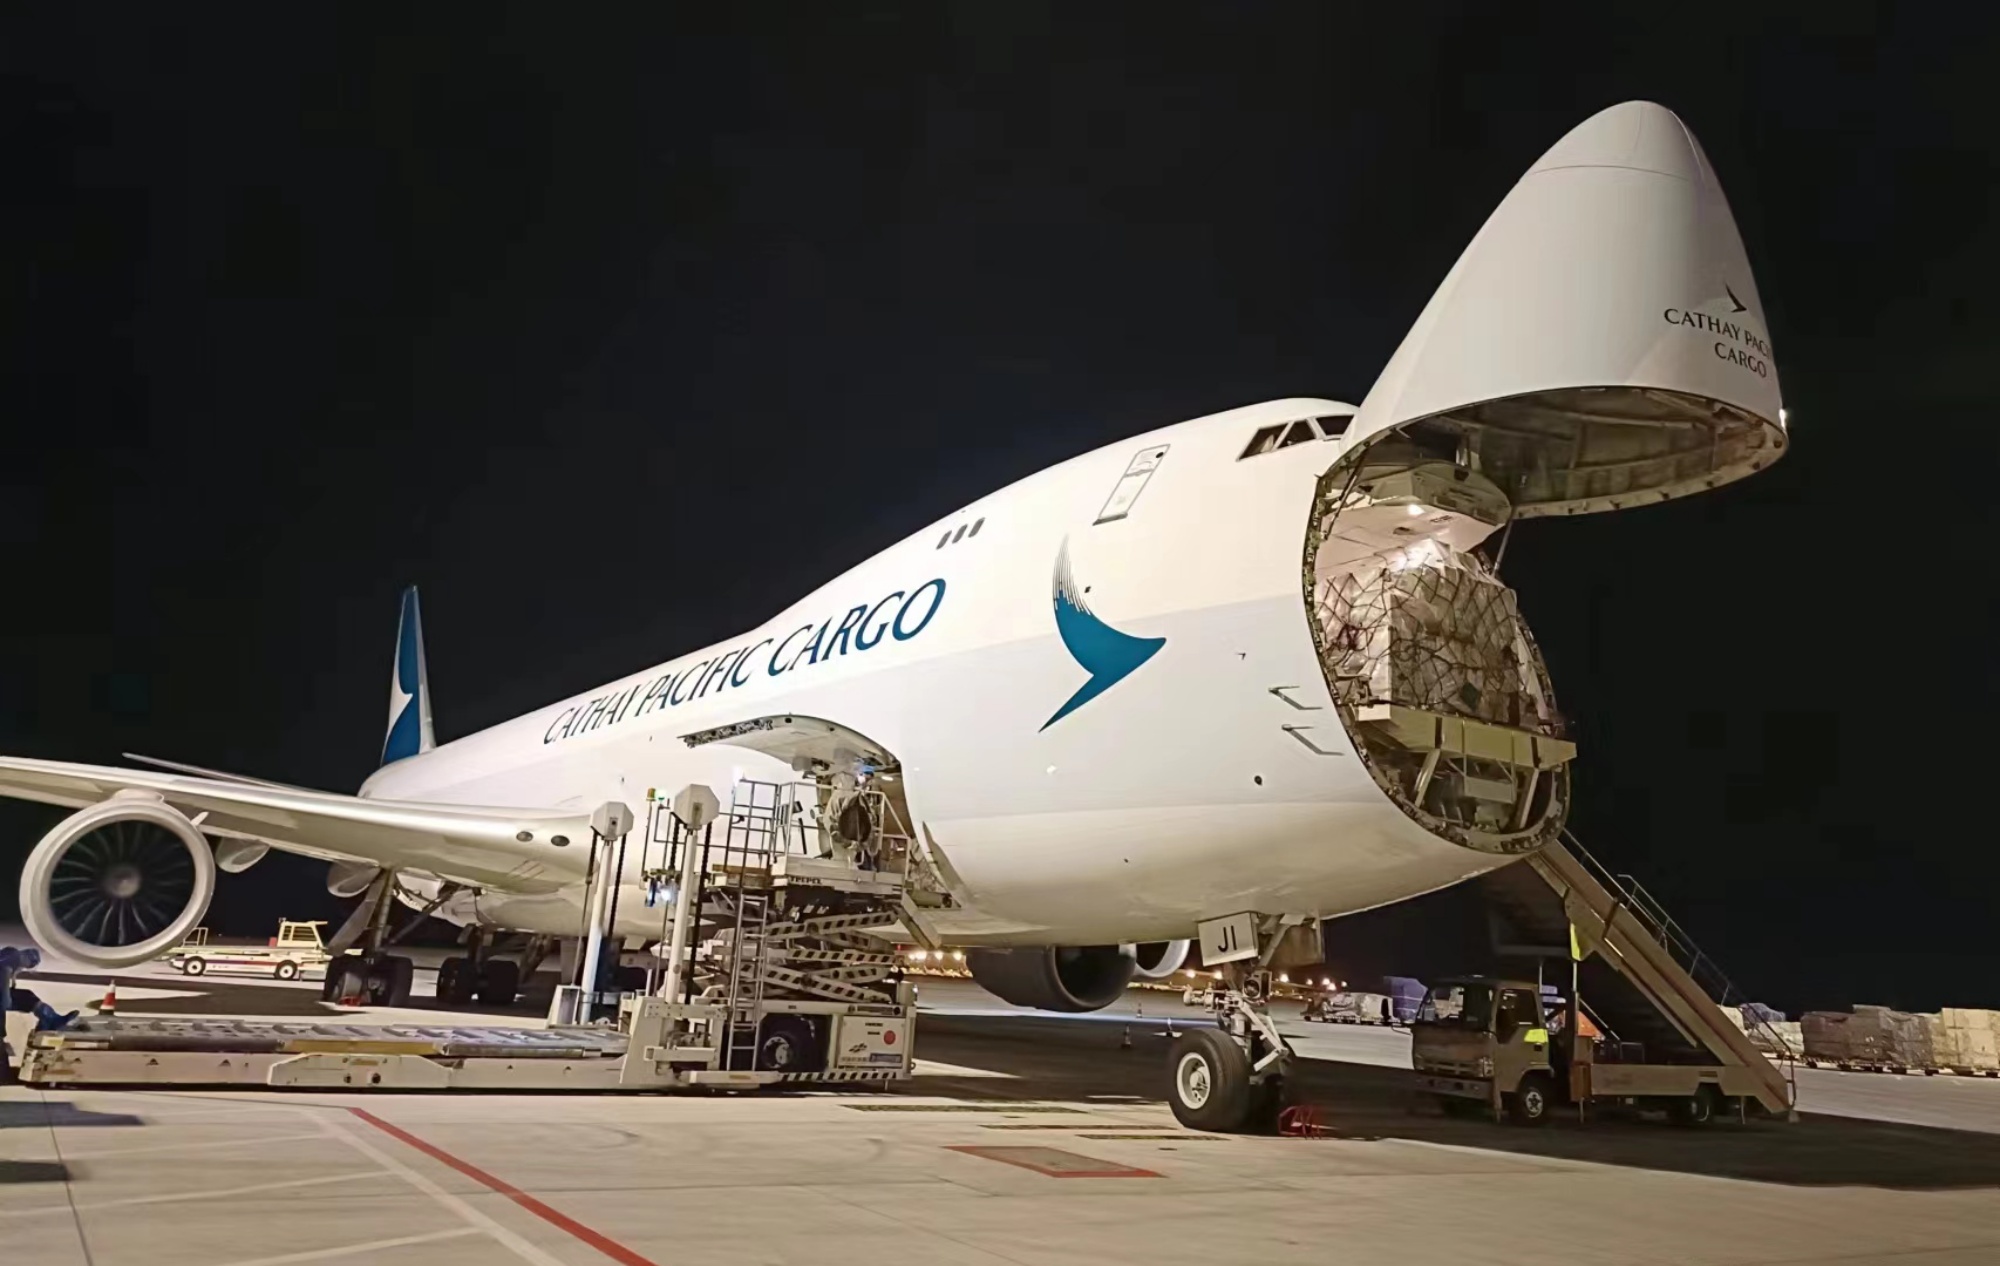 a Cathay Pacific Cargo freighter with its nose opened to load shipments at night